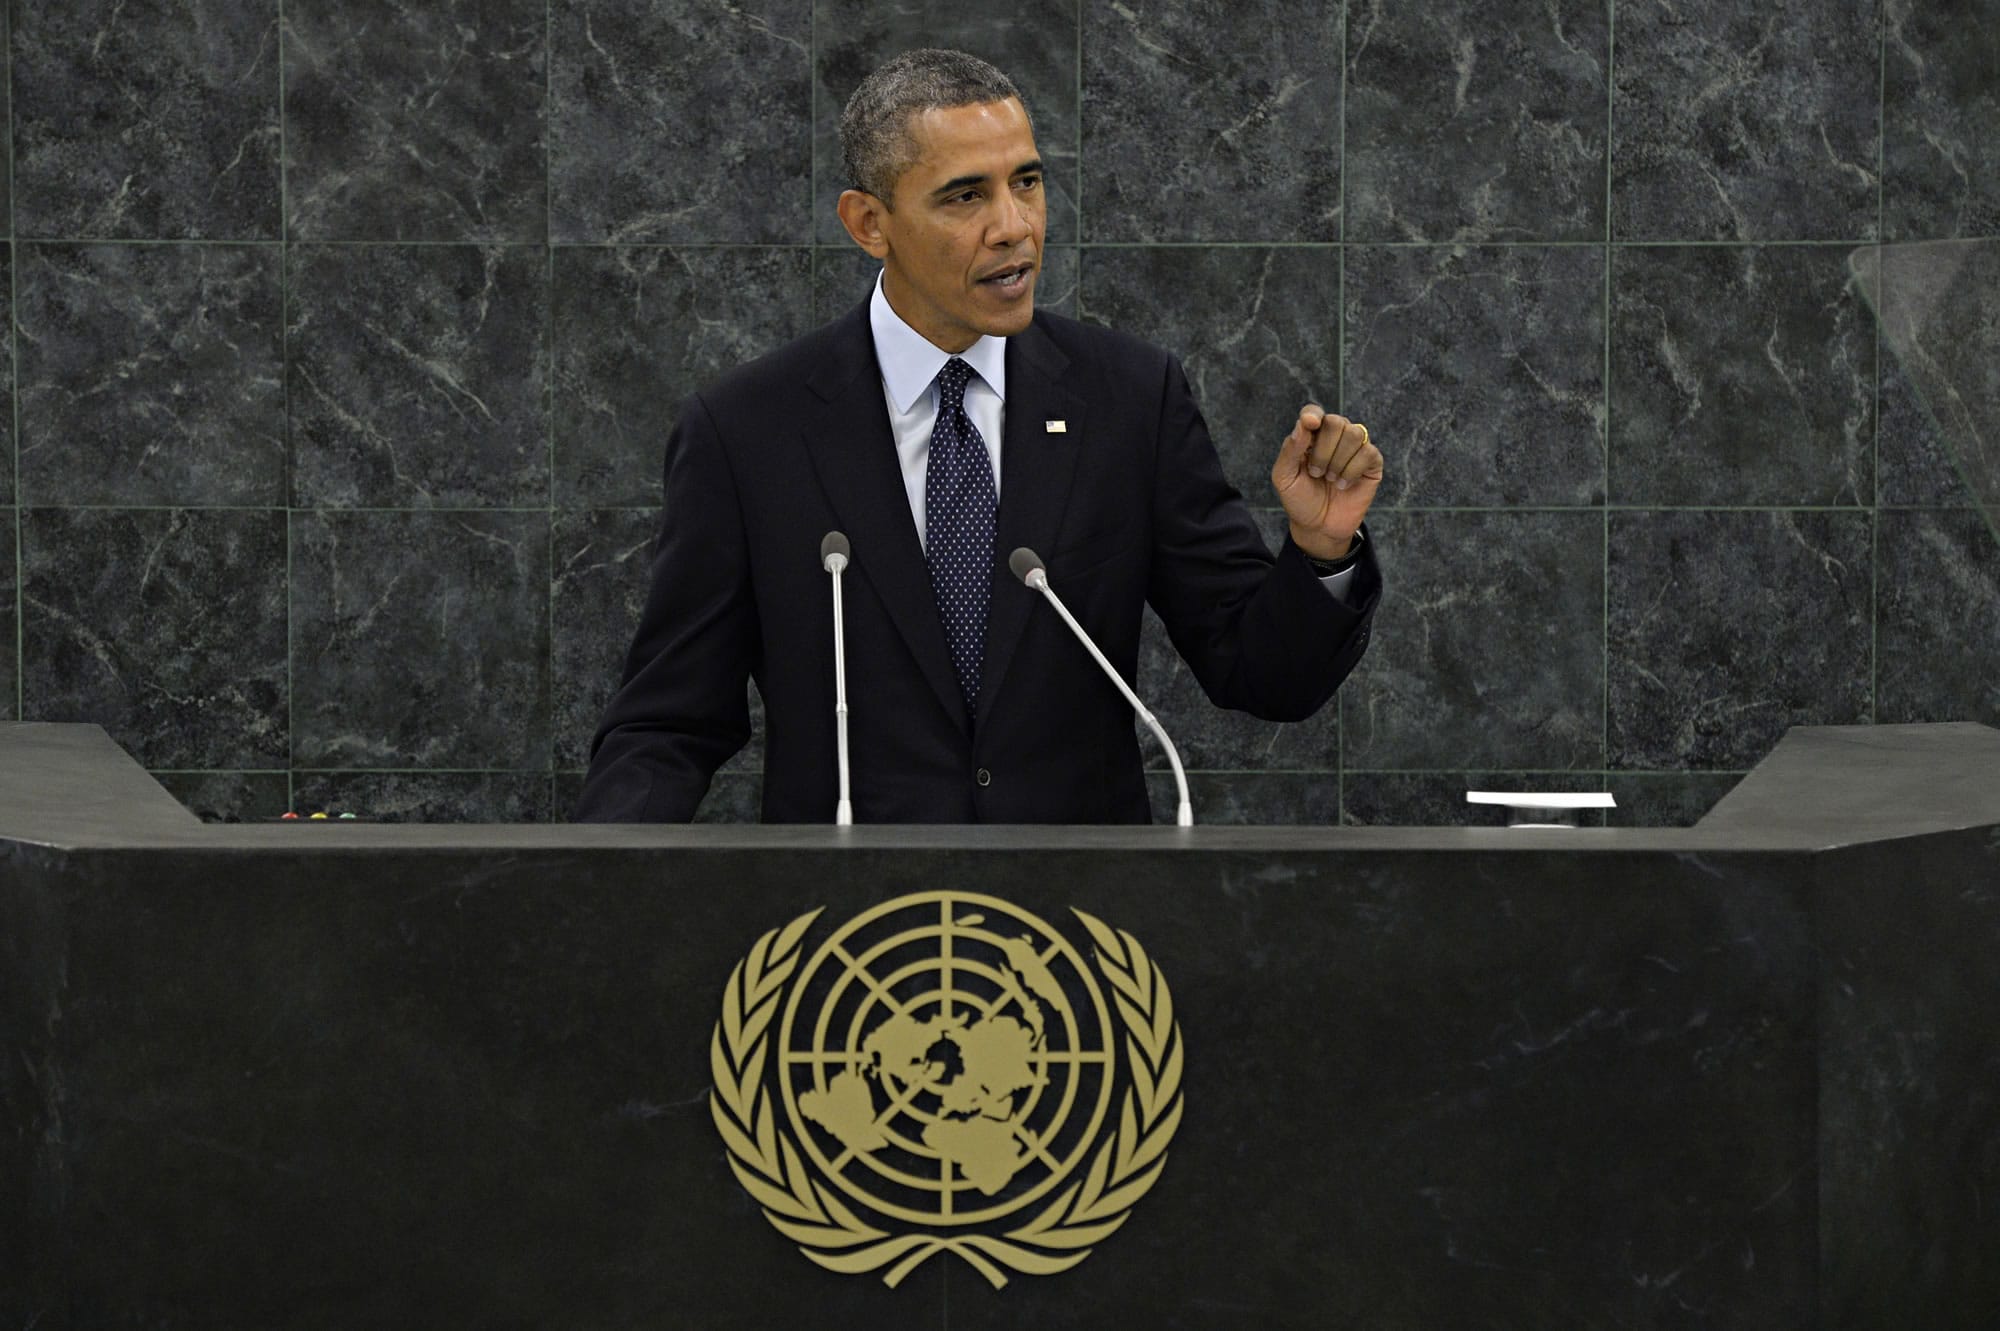 President Barack Obama addresses the 68th Session of the United Nations General Assembly on Tuesday.